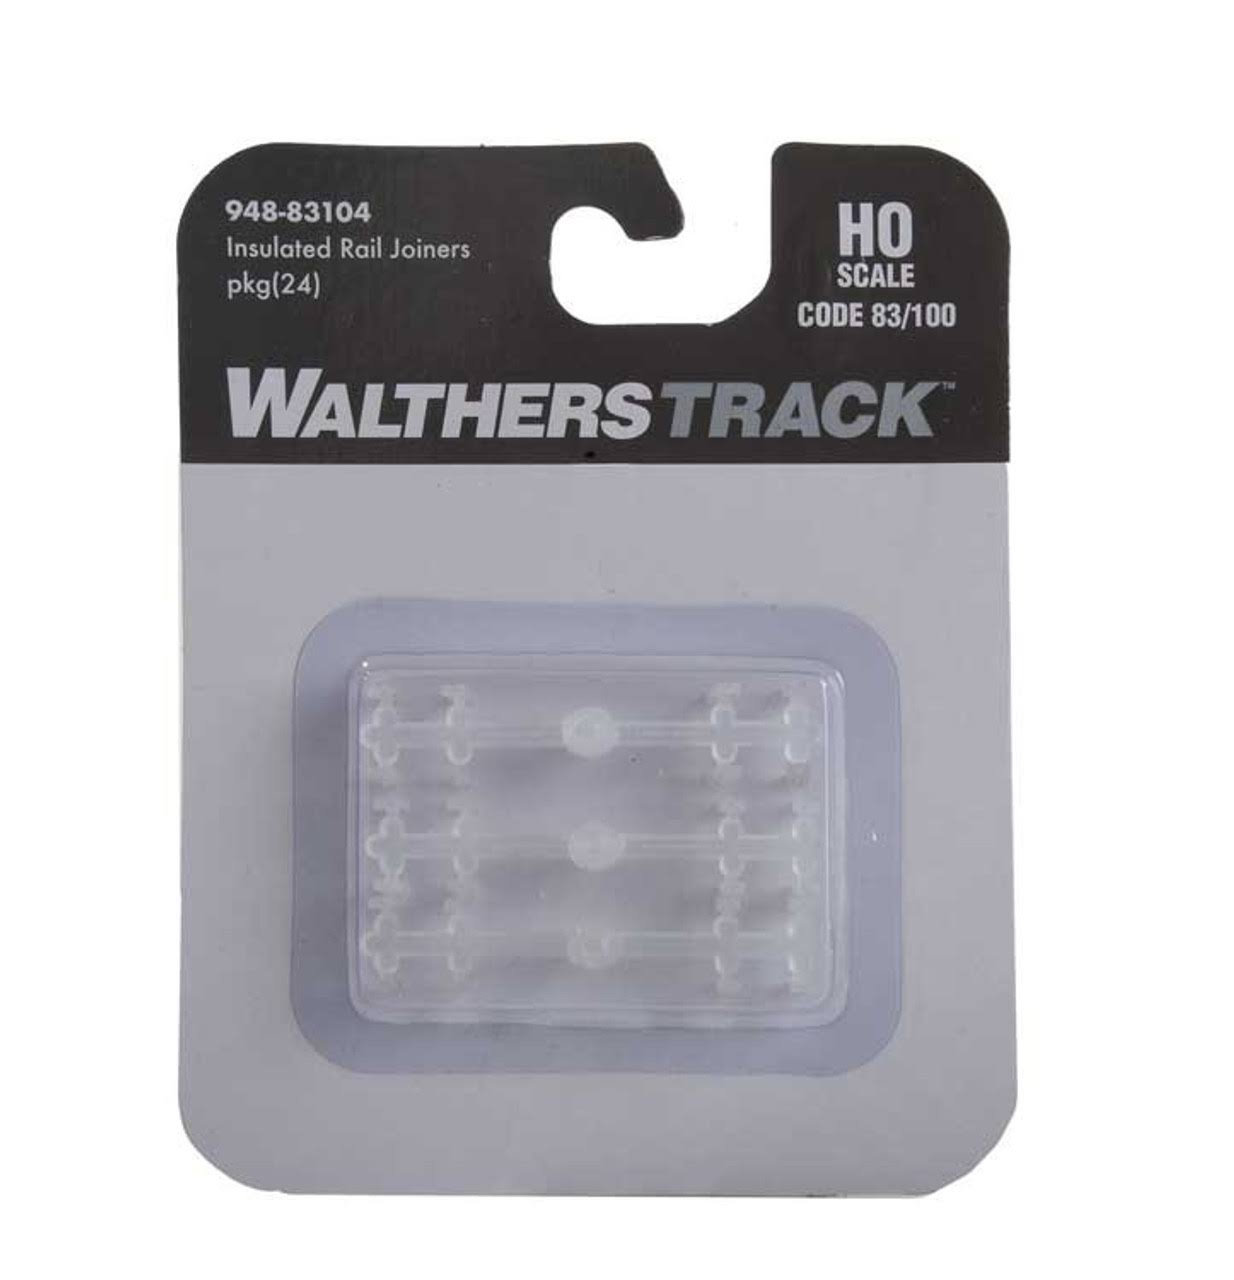 Walthers Track 948-83104 HO Scale Code 83 or 100 Insulated Rail Joiners pkg(24)